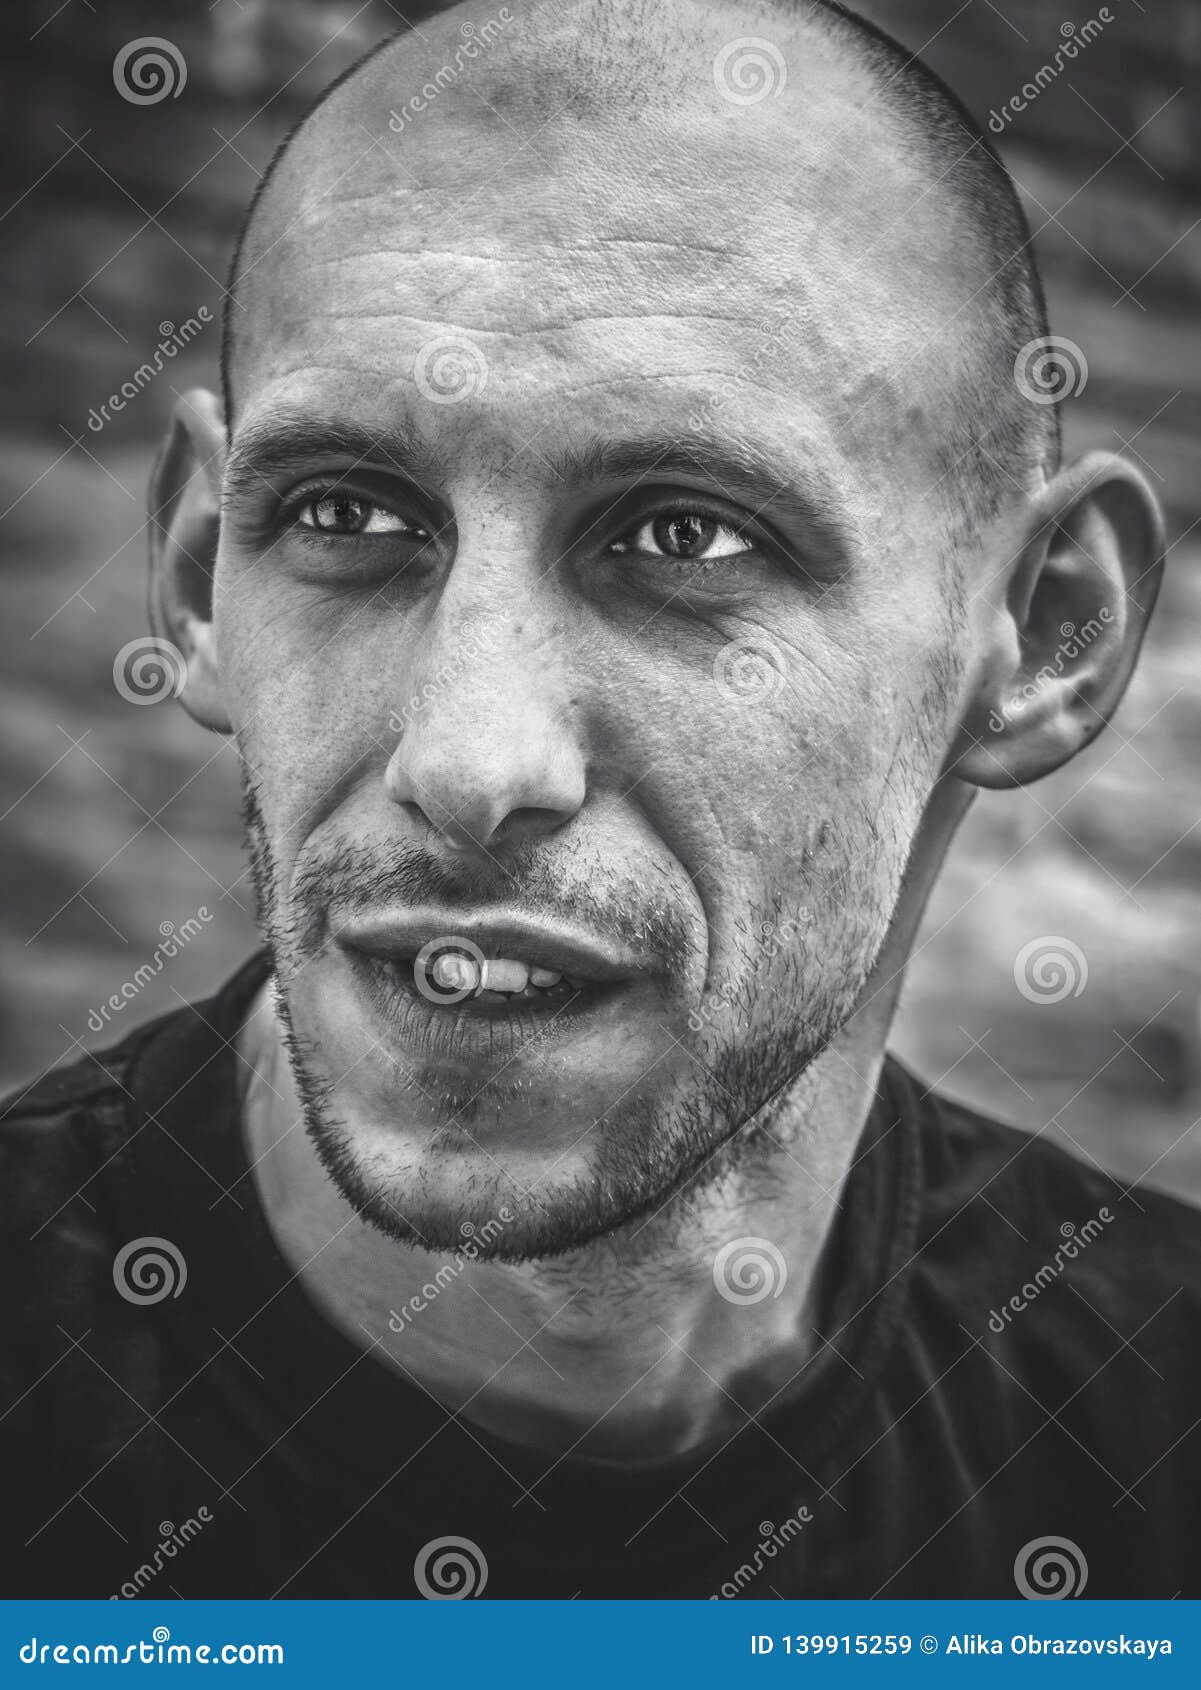 Closeup Portrait of a Bald Man with a Smile and Brutal Appearance in ...